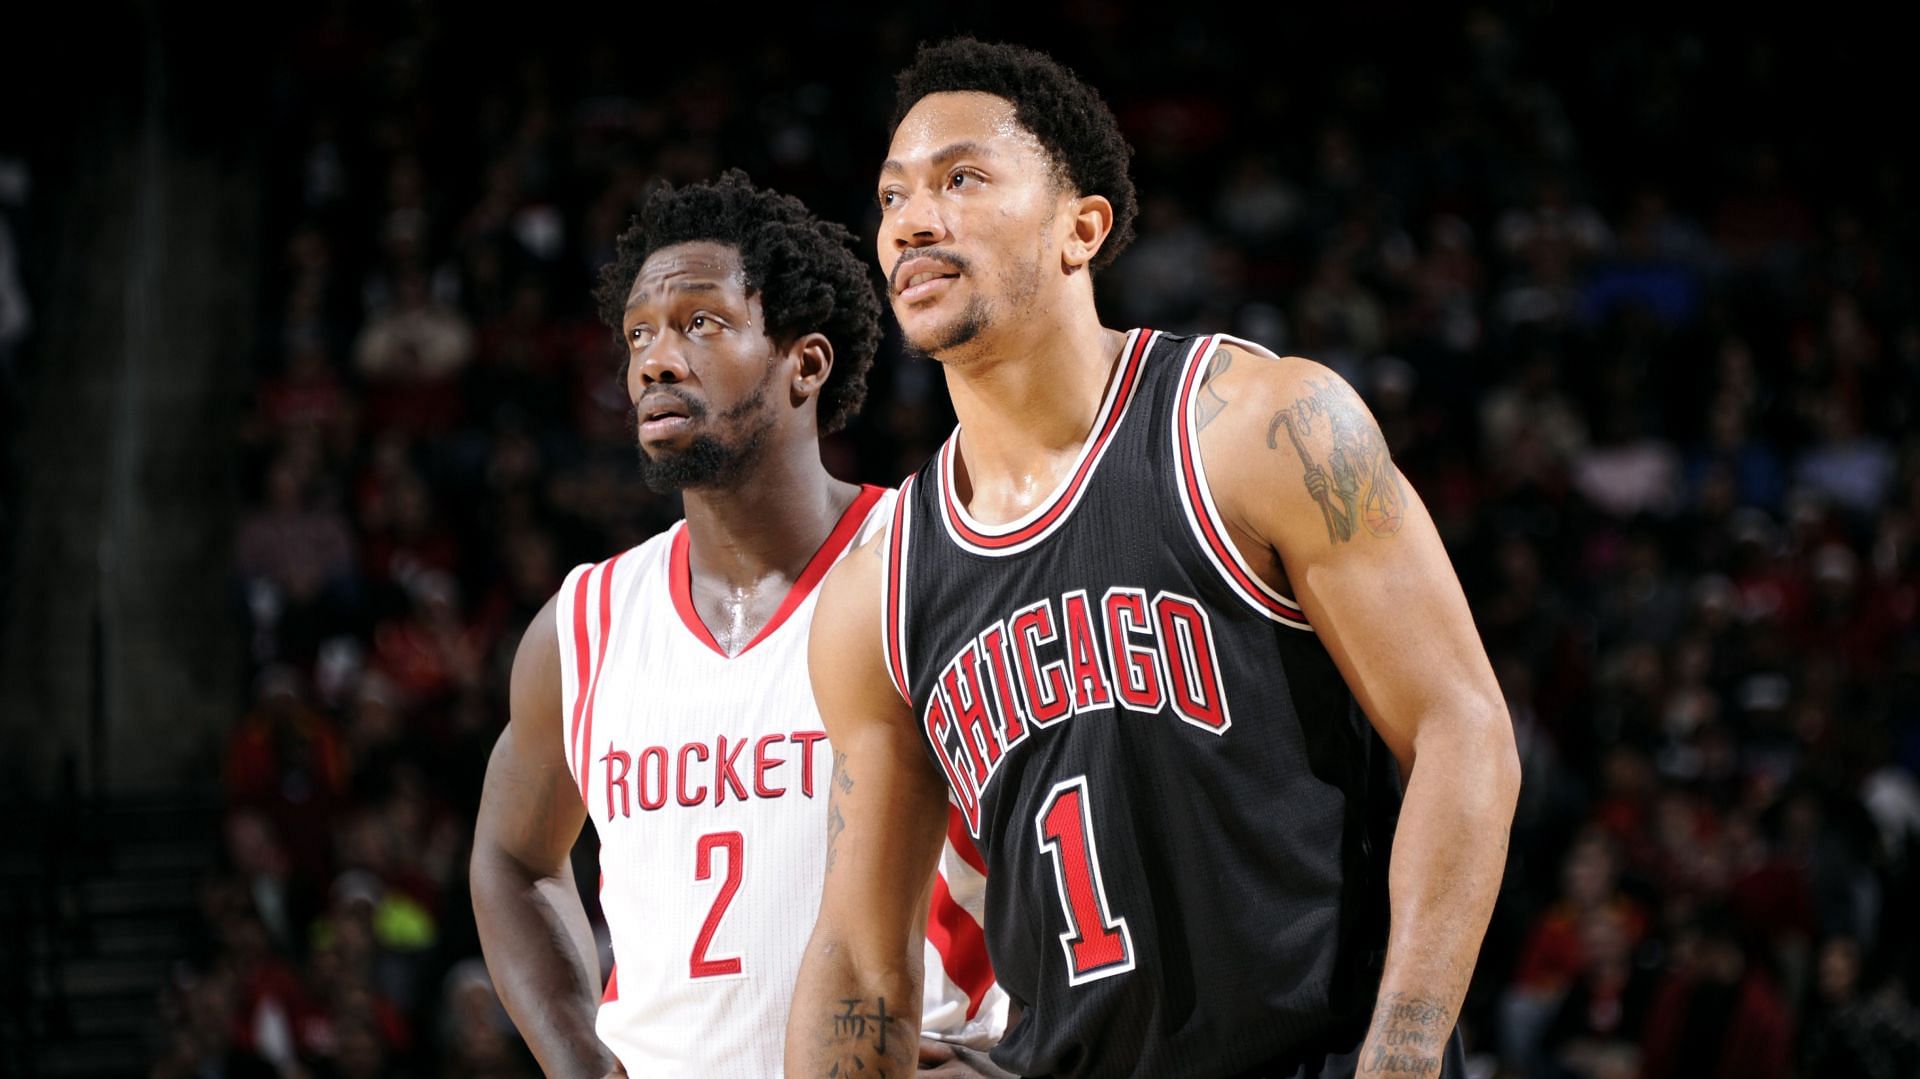 Patrick Beverley shares his bond with Derrick Rose